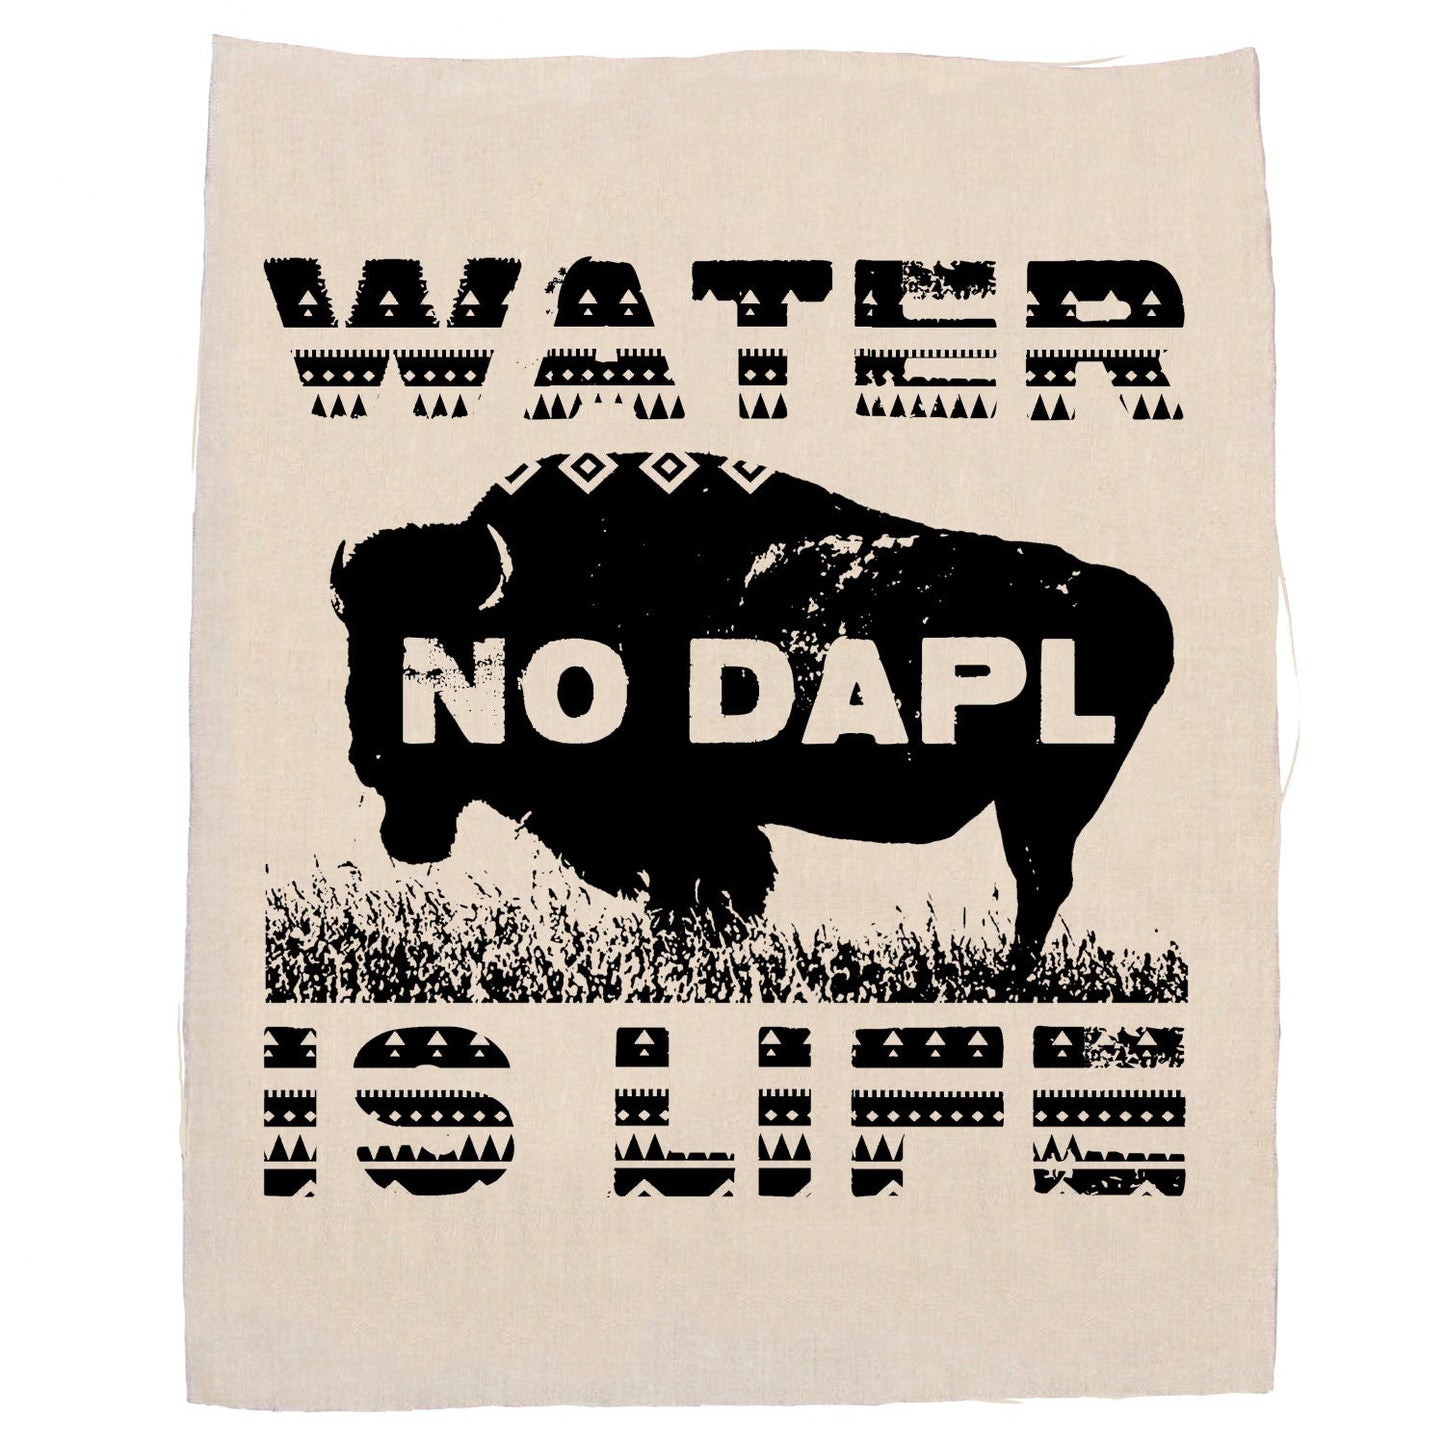 Water Is Life No DAPL Back Patch, Protest Dakota Access Pipeline, Standing Rock Patch, Peaceful Protest Patch, Environment Patch, Mini